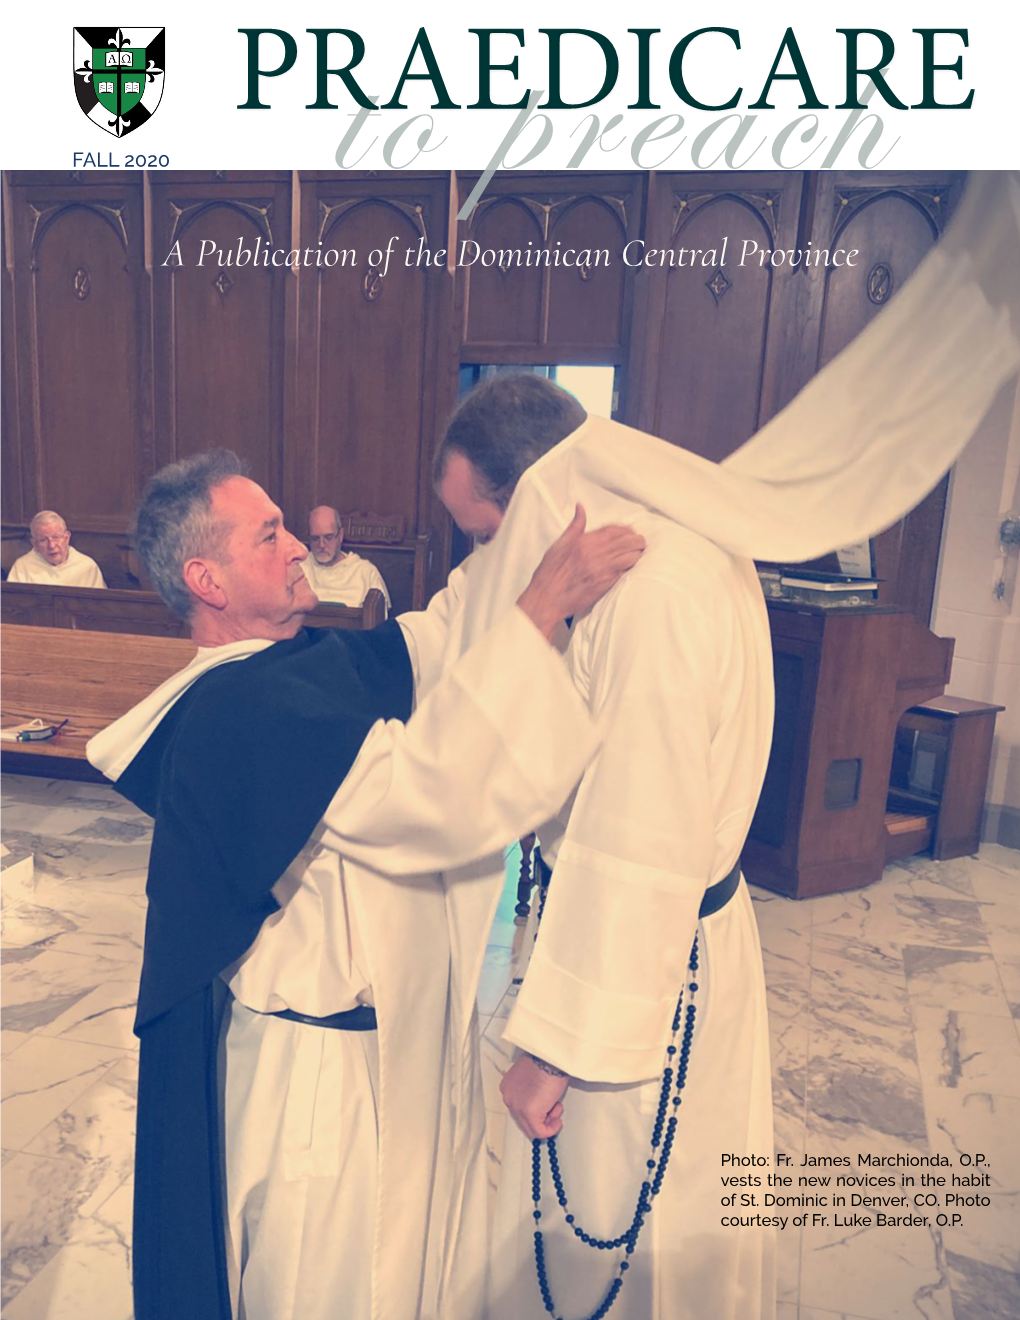 A Publication of the Dominican Central Province